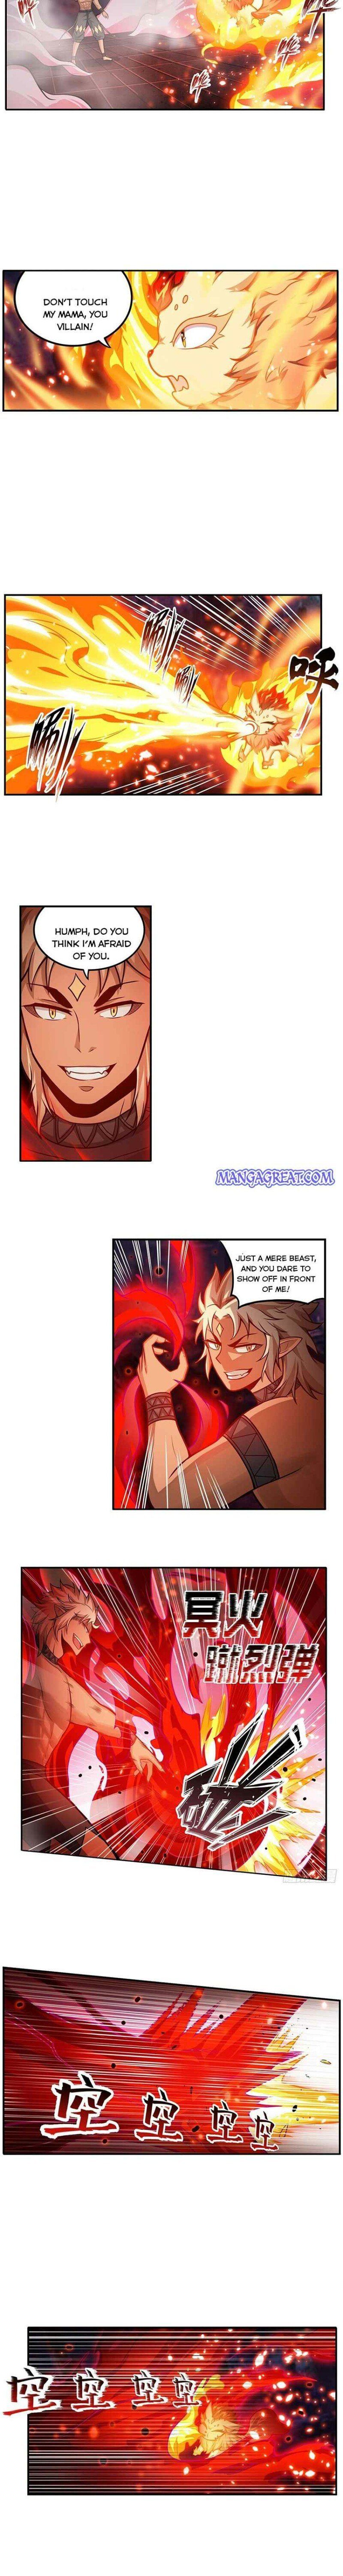 Infinite Apostles and Twelve War Girls Chapter 204 page 6